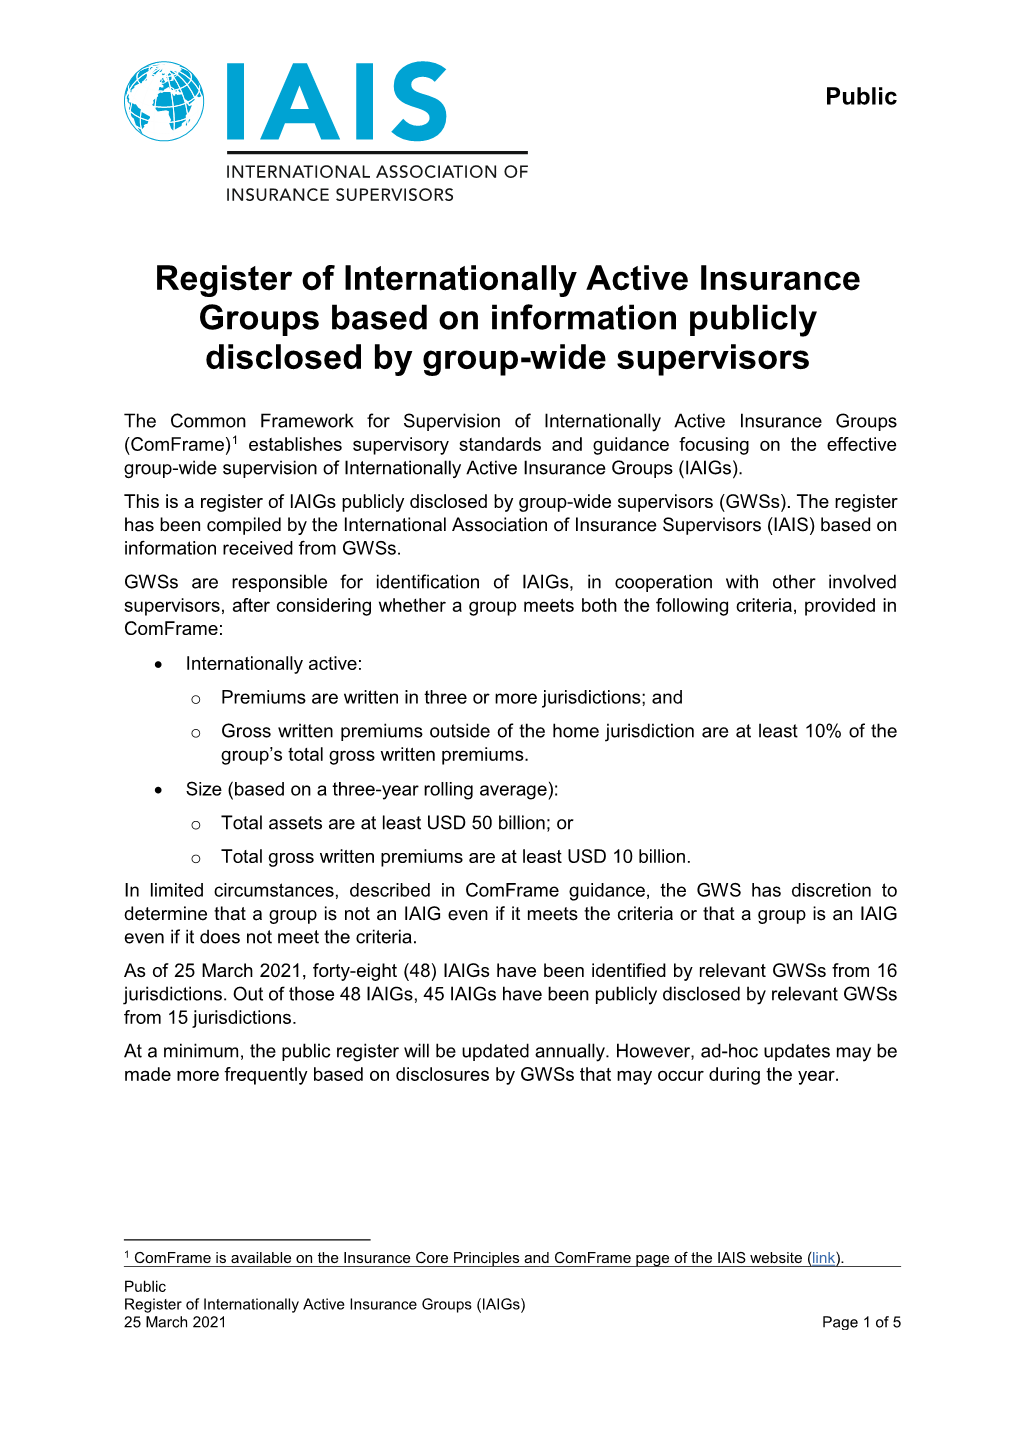 Register of Internationally Active Insurance Groups Based on Information Publicly Disclosed by Group-Wide Supervisors